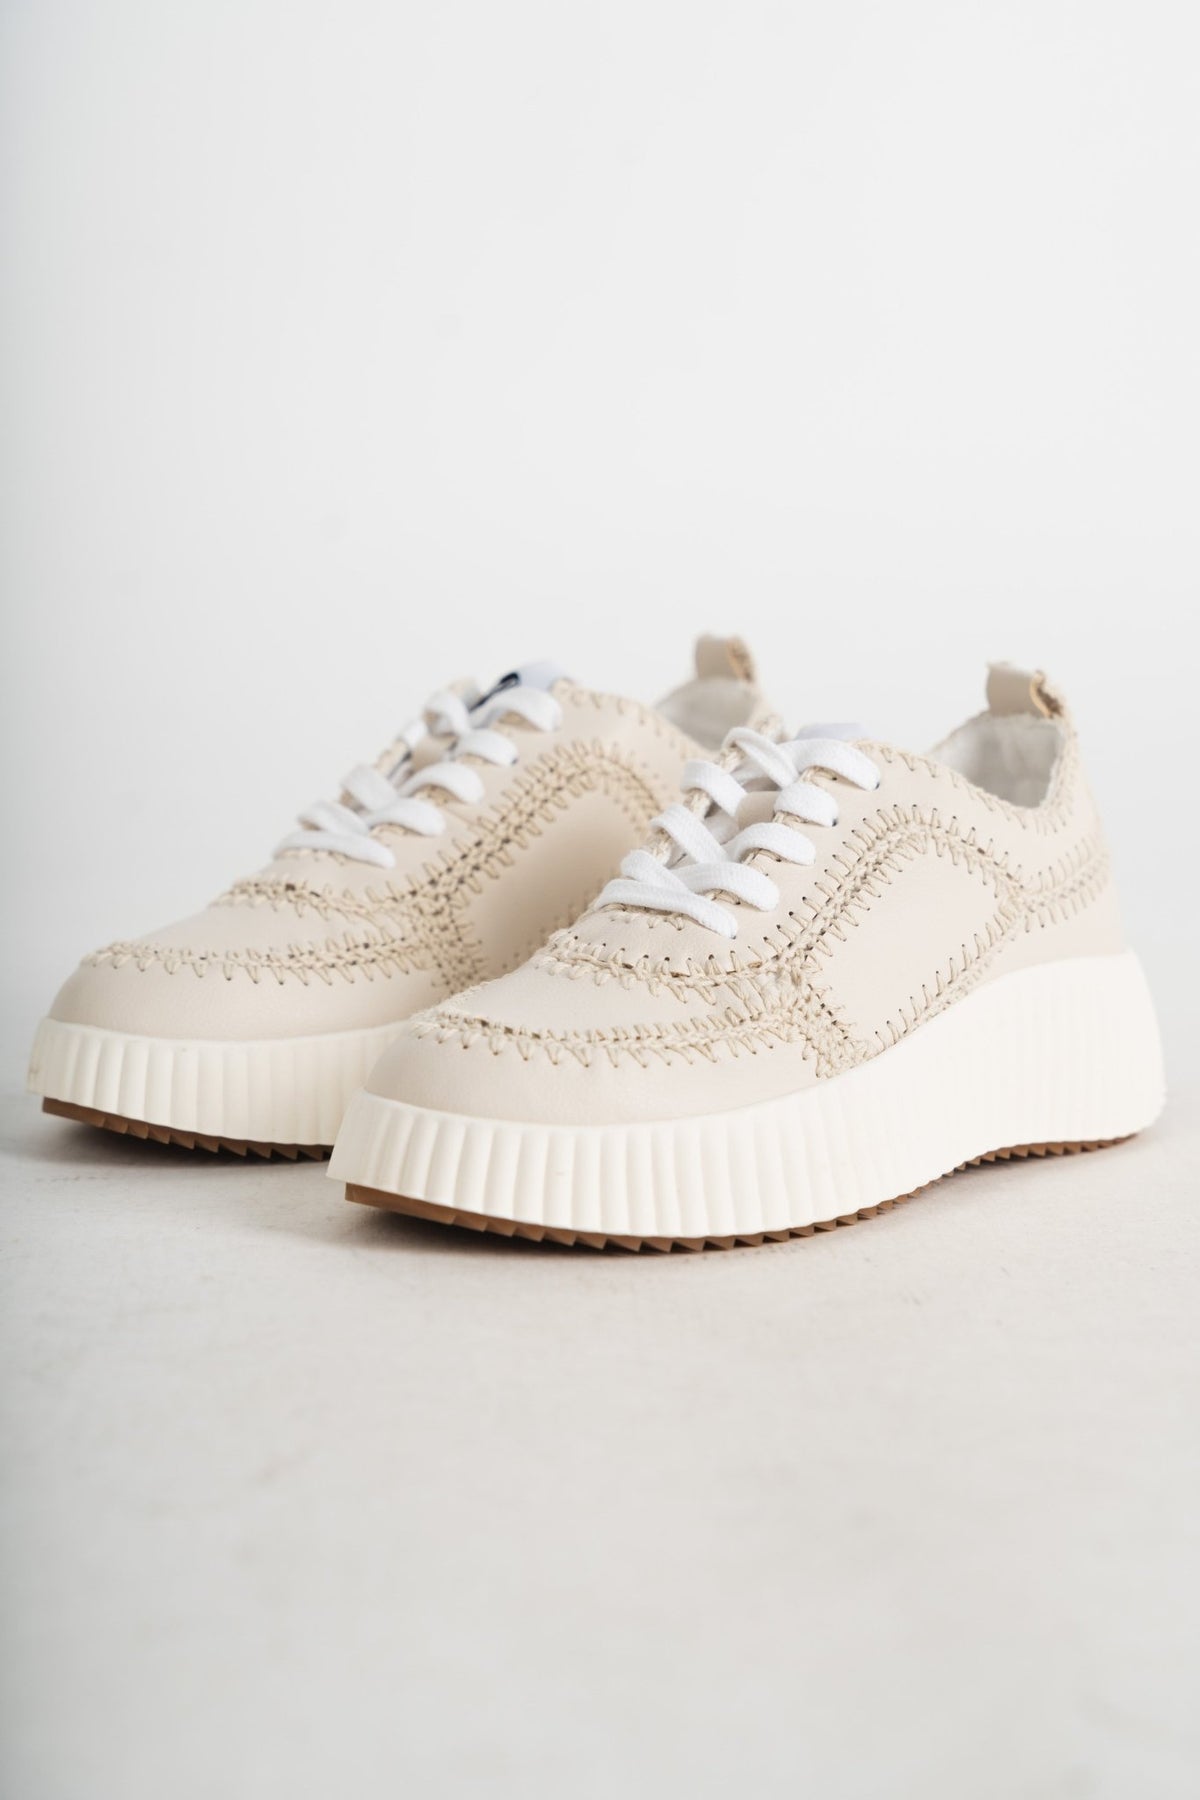 Nelson stitched sneakers natural - Cute sneakers - Trendy Shoes at Lush Fashion Lounge Boutique in Oklahoma City